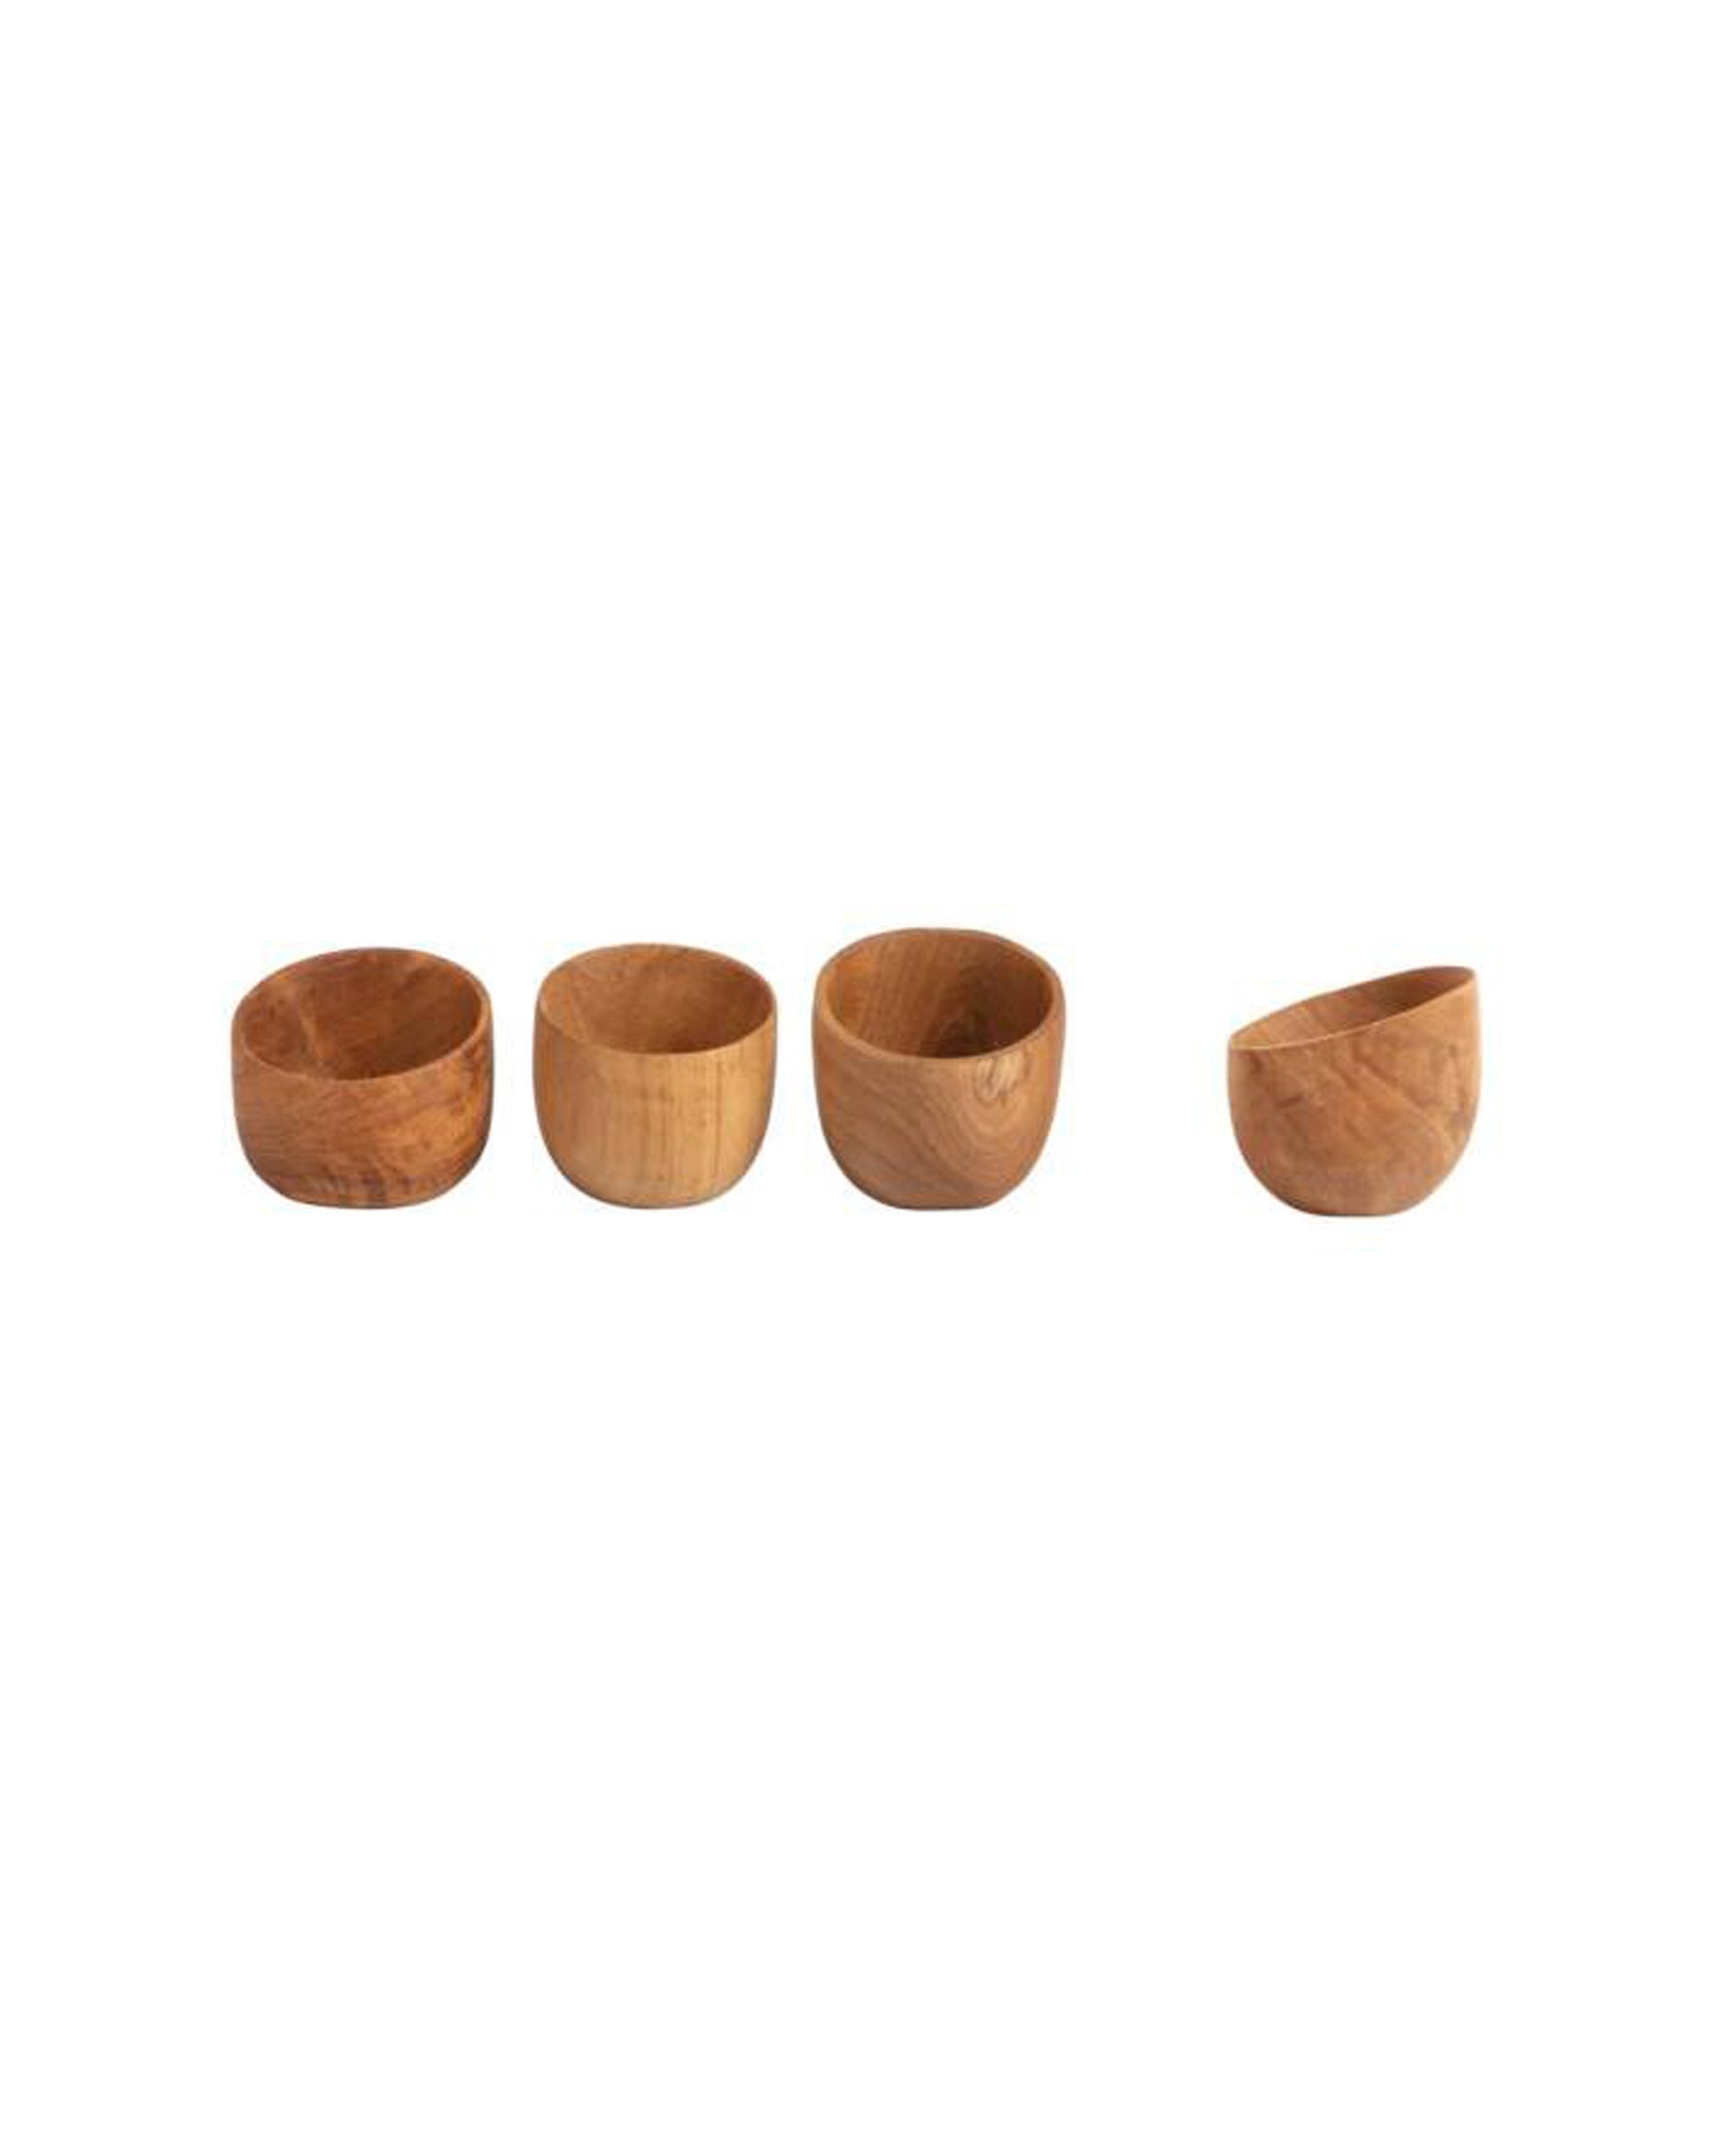 The Every Space handmade, durable, reclaimed teak wood Eggy Egg Stand egg cup by Original Home